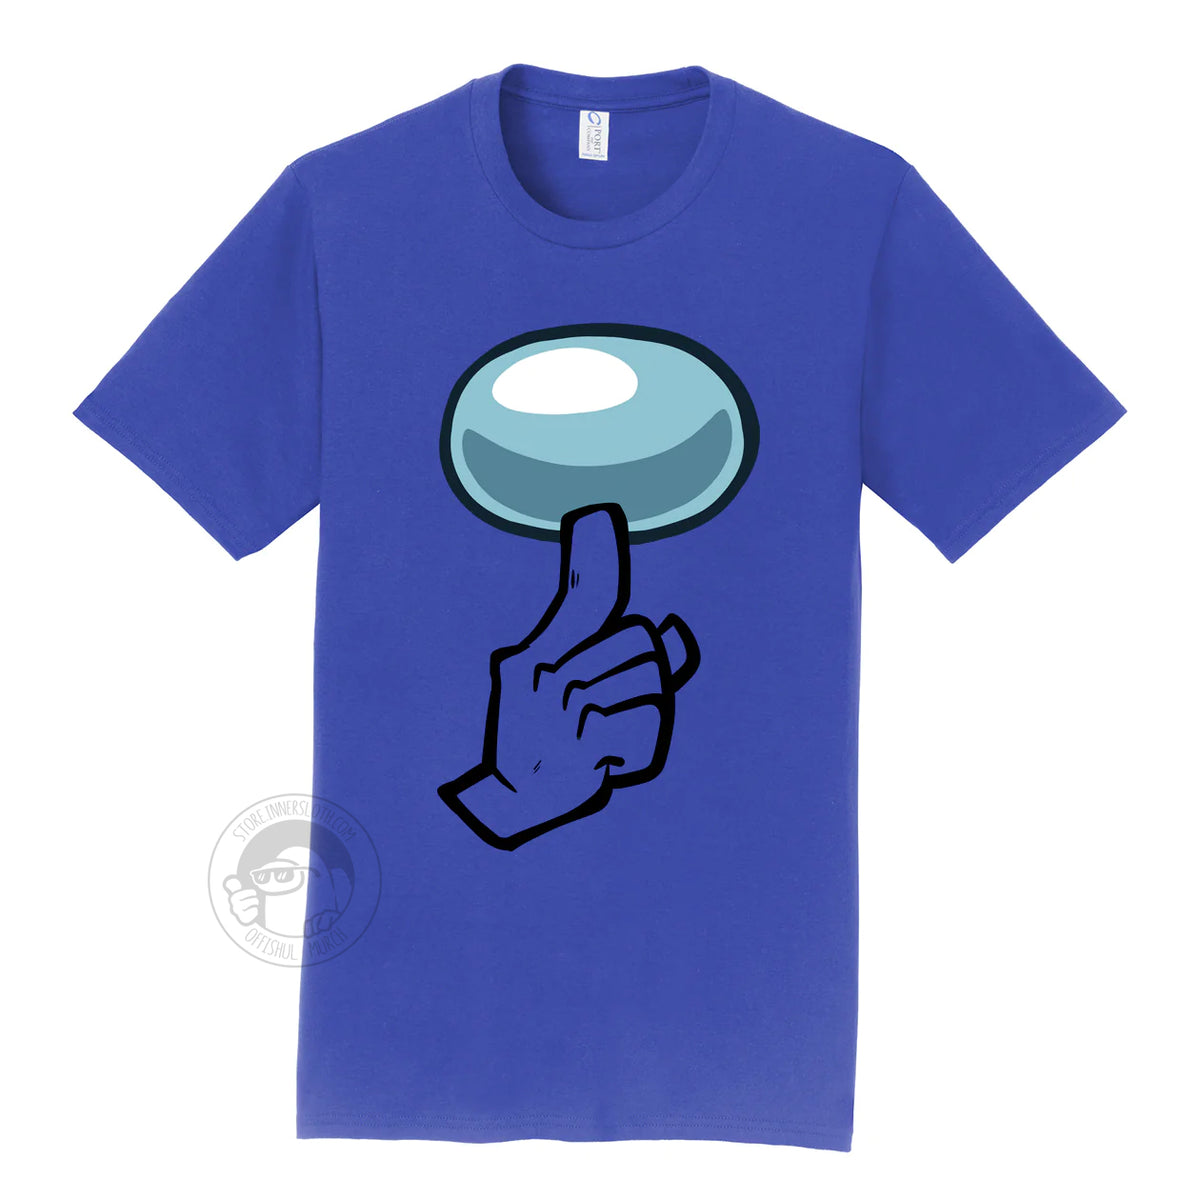 A product photograph of the Among Us: Shhhirt t-shirt in blue. The art on the shirt shows the crewmate visor and a hand with one finger pointing up in a “shh”ing pose